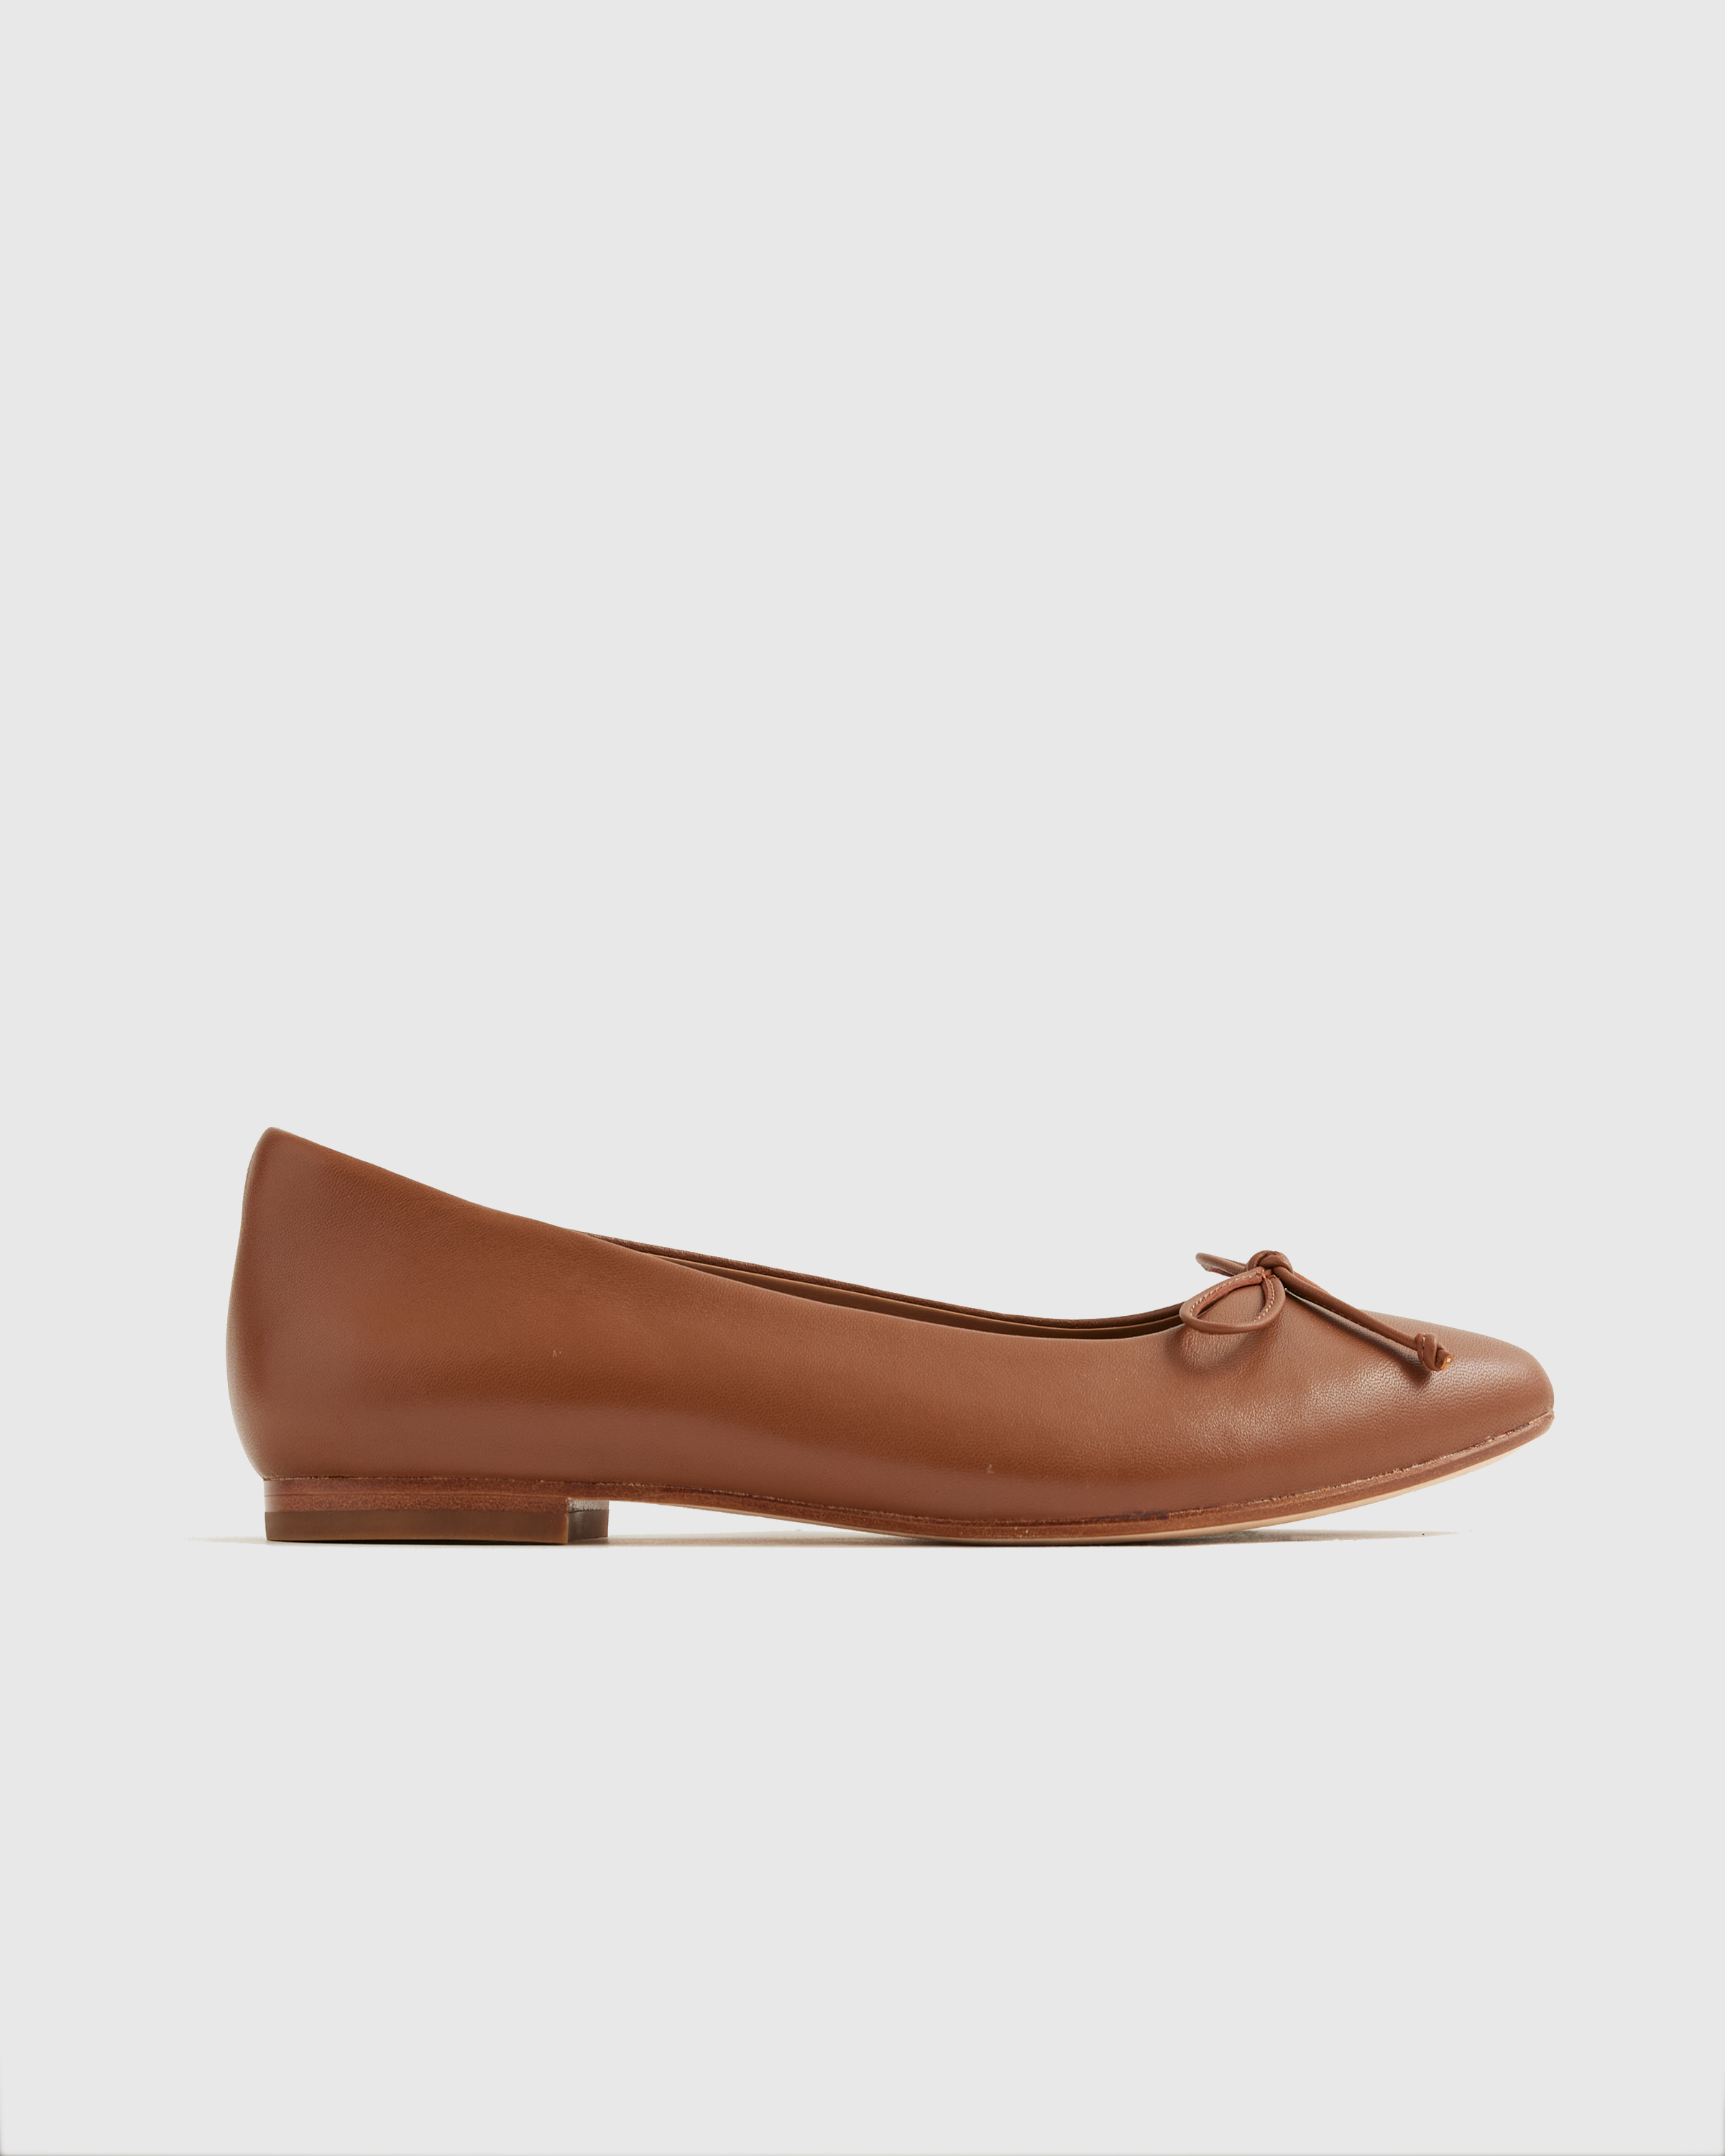 Quince Women's Italian Leather Pointed Bow Flat In Cognac